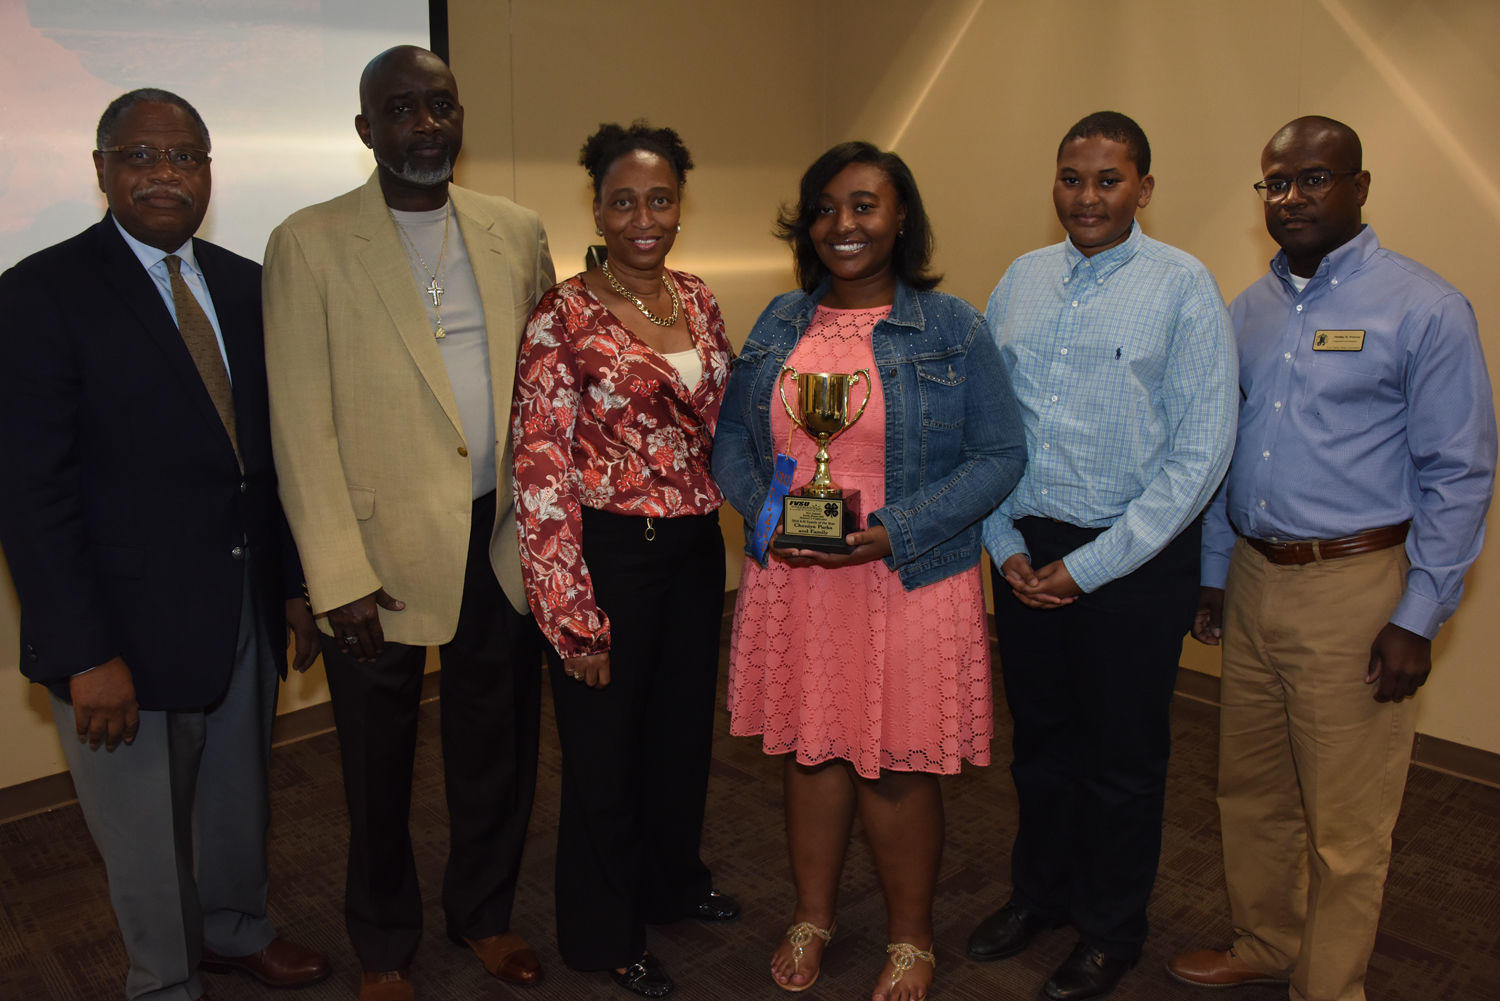 Dr. Mark Latimore Jr. (far left), FVSU Extension administrator and Phillip Petway (far right), FVSU 4-H Twiggs County Extension agent, present Cheniya Parks (holding trophy) and her family the 4-H Family of the Year Award.